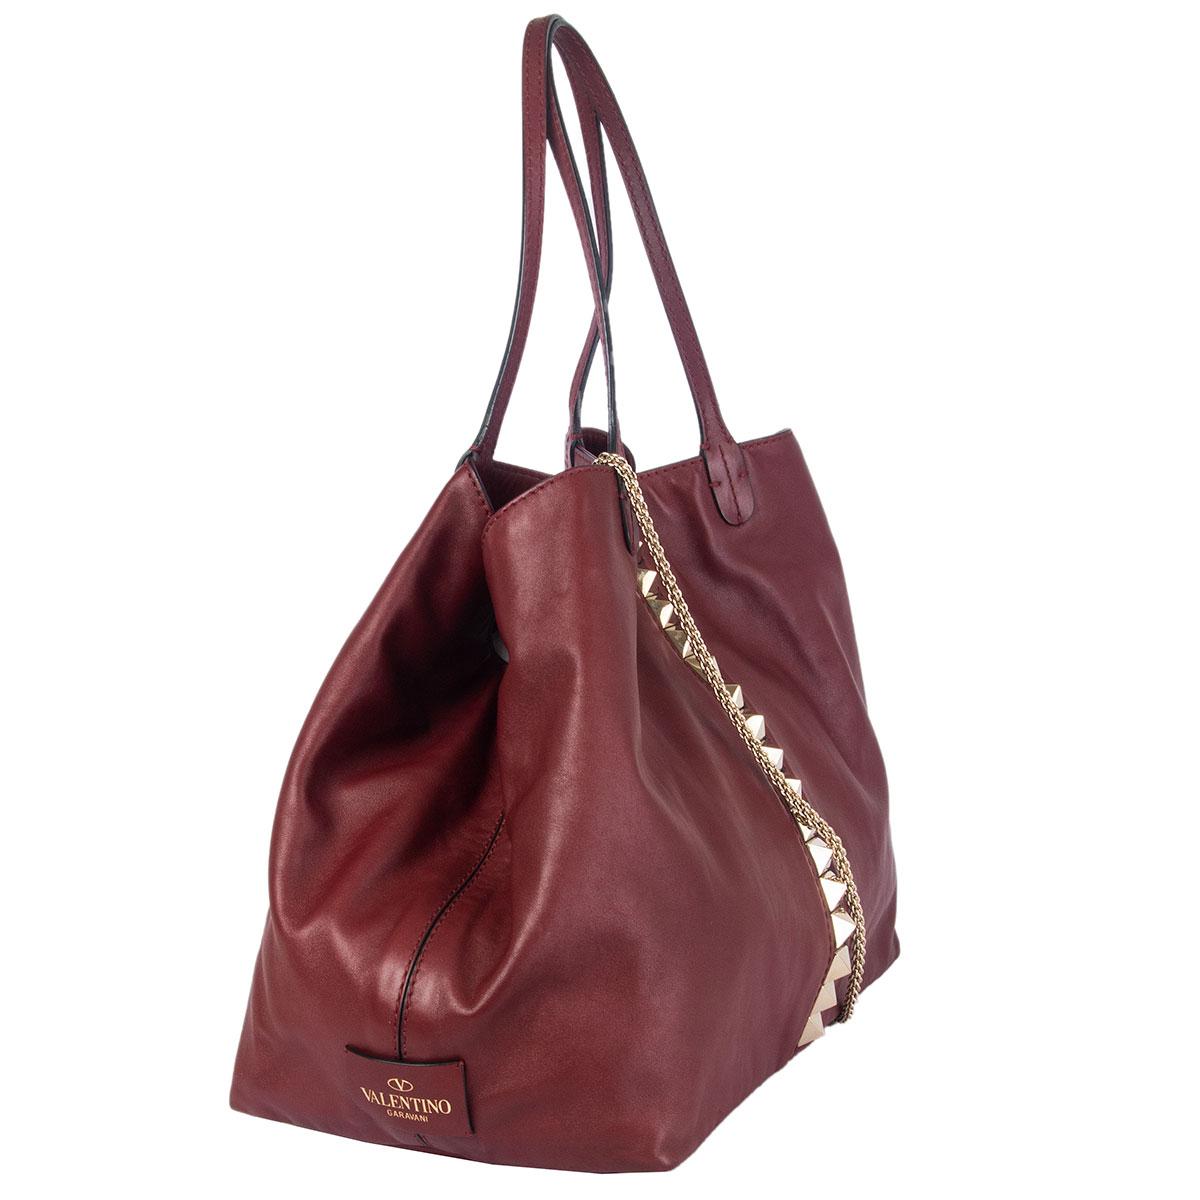 100% authentic Valentino Large Va Va Voom tote bag in burgundy smooth leather featuring light gold-tone signature pyramid studs. Closes with a buckle and is lined in beige canvas with one zipper pocket against the back and two open pockets against